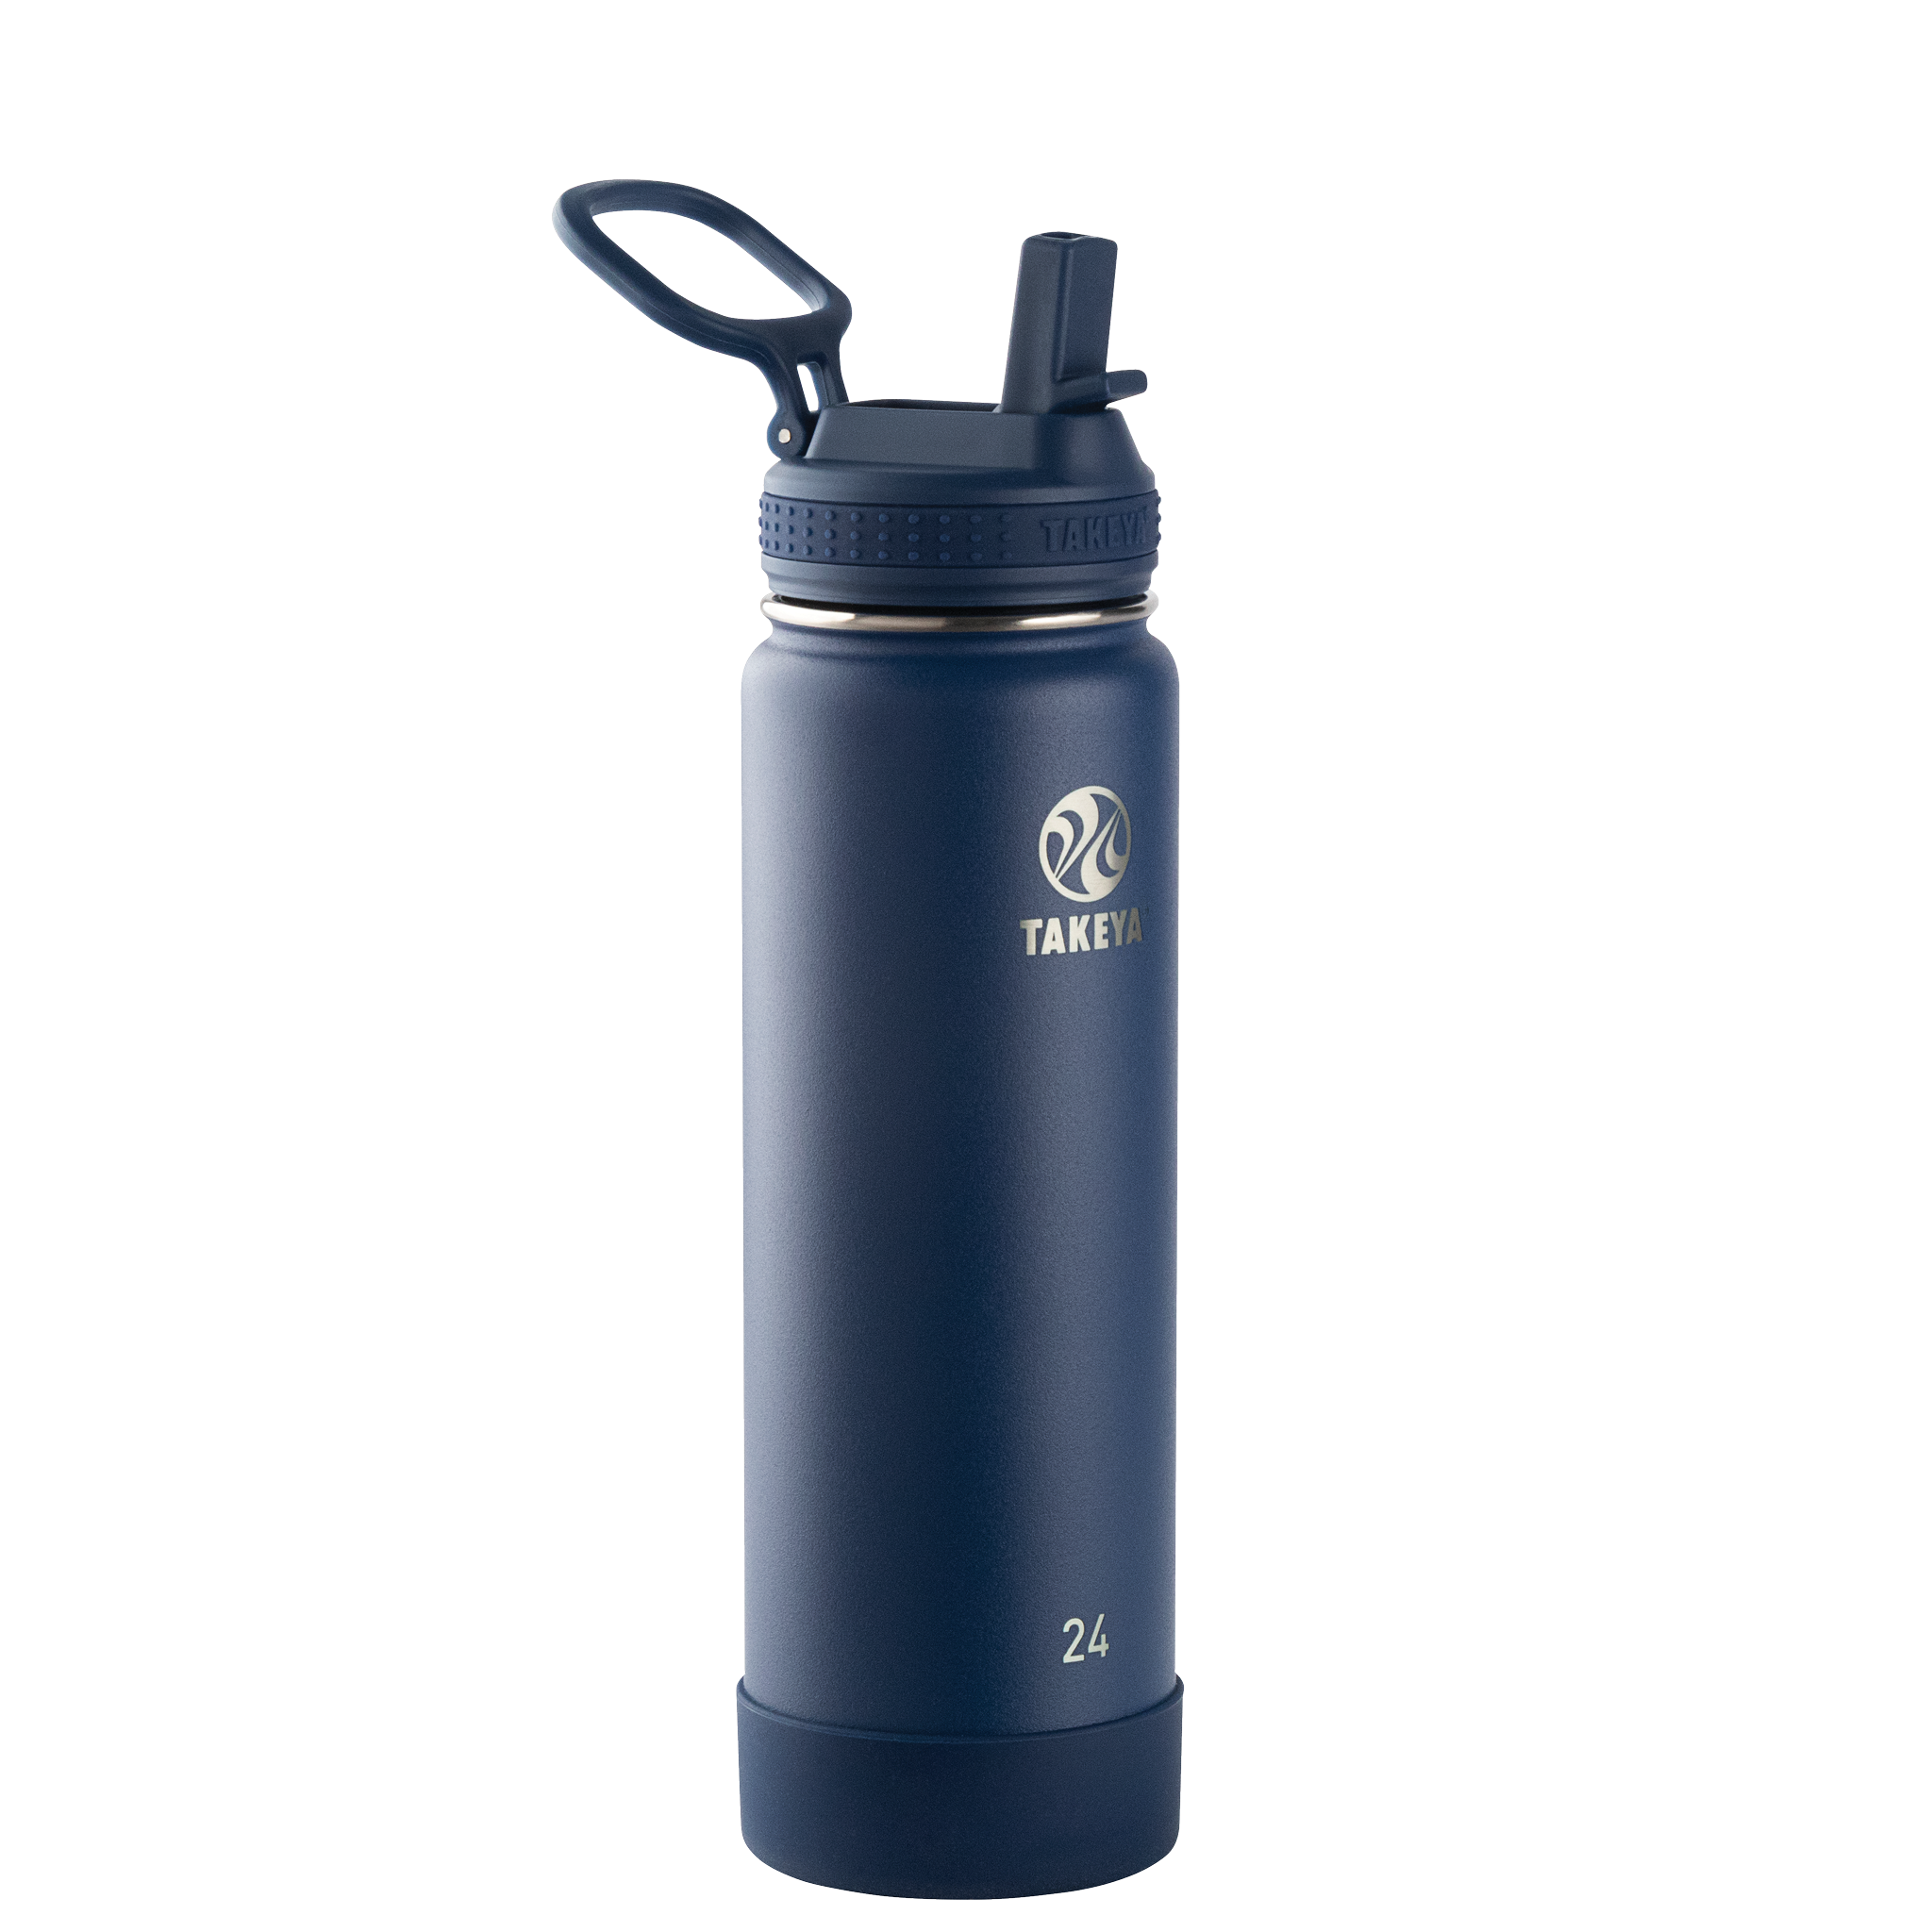 Takeya Actives 24 oz. Midnight Insulated Stainless Steel Water Bottle with Straw Lid, Black